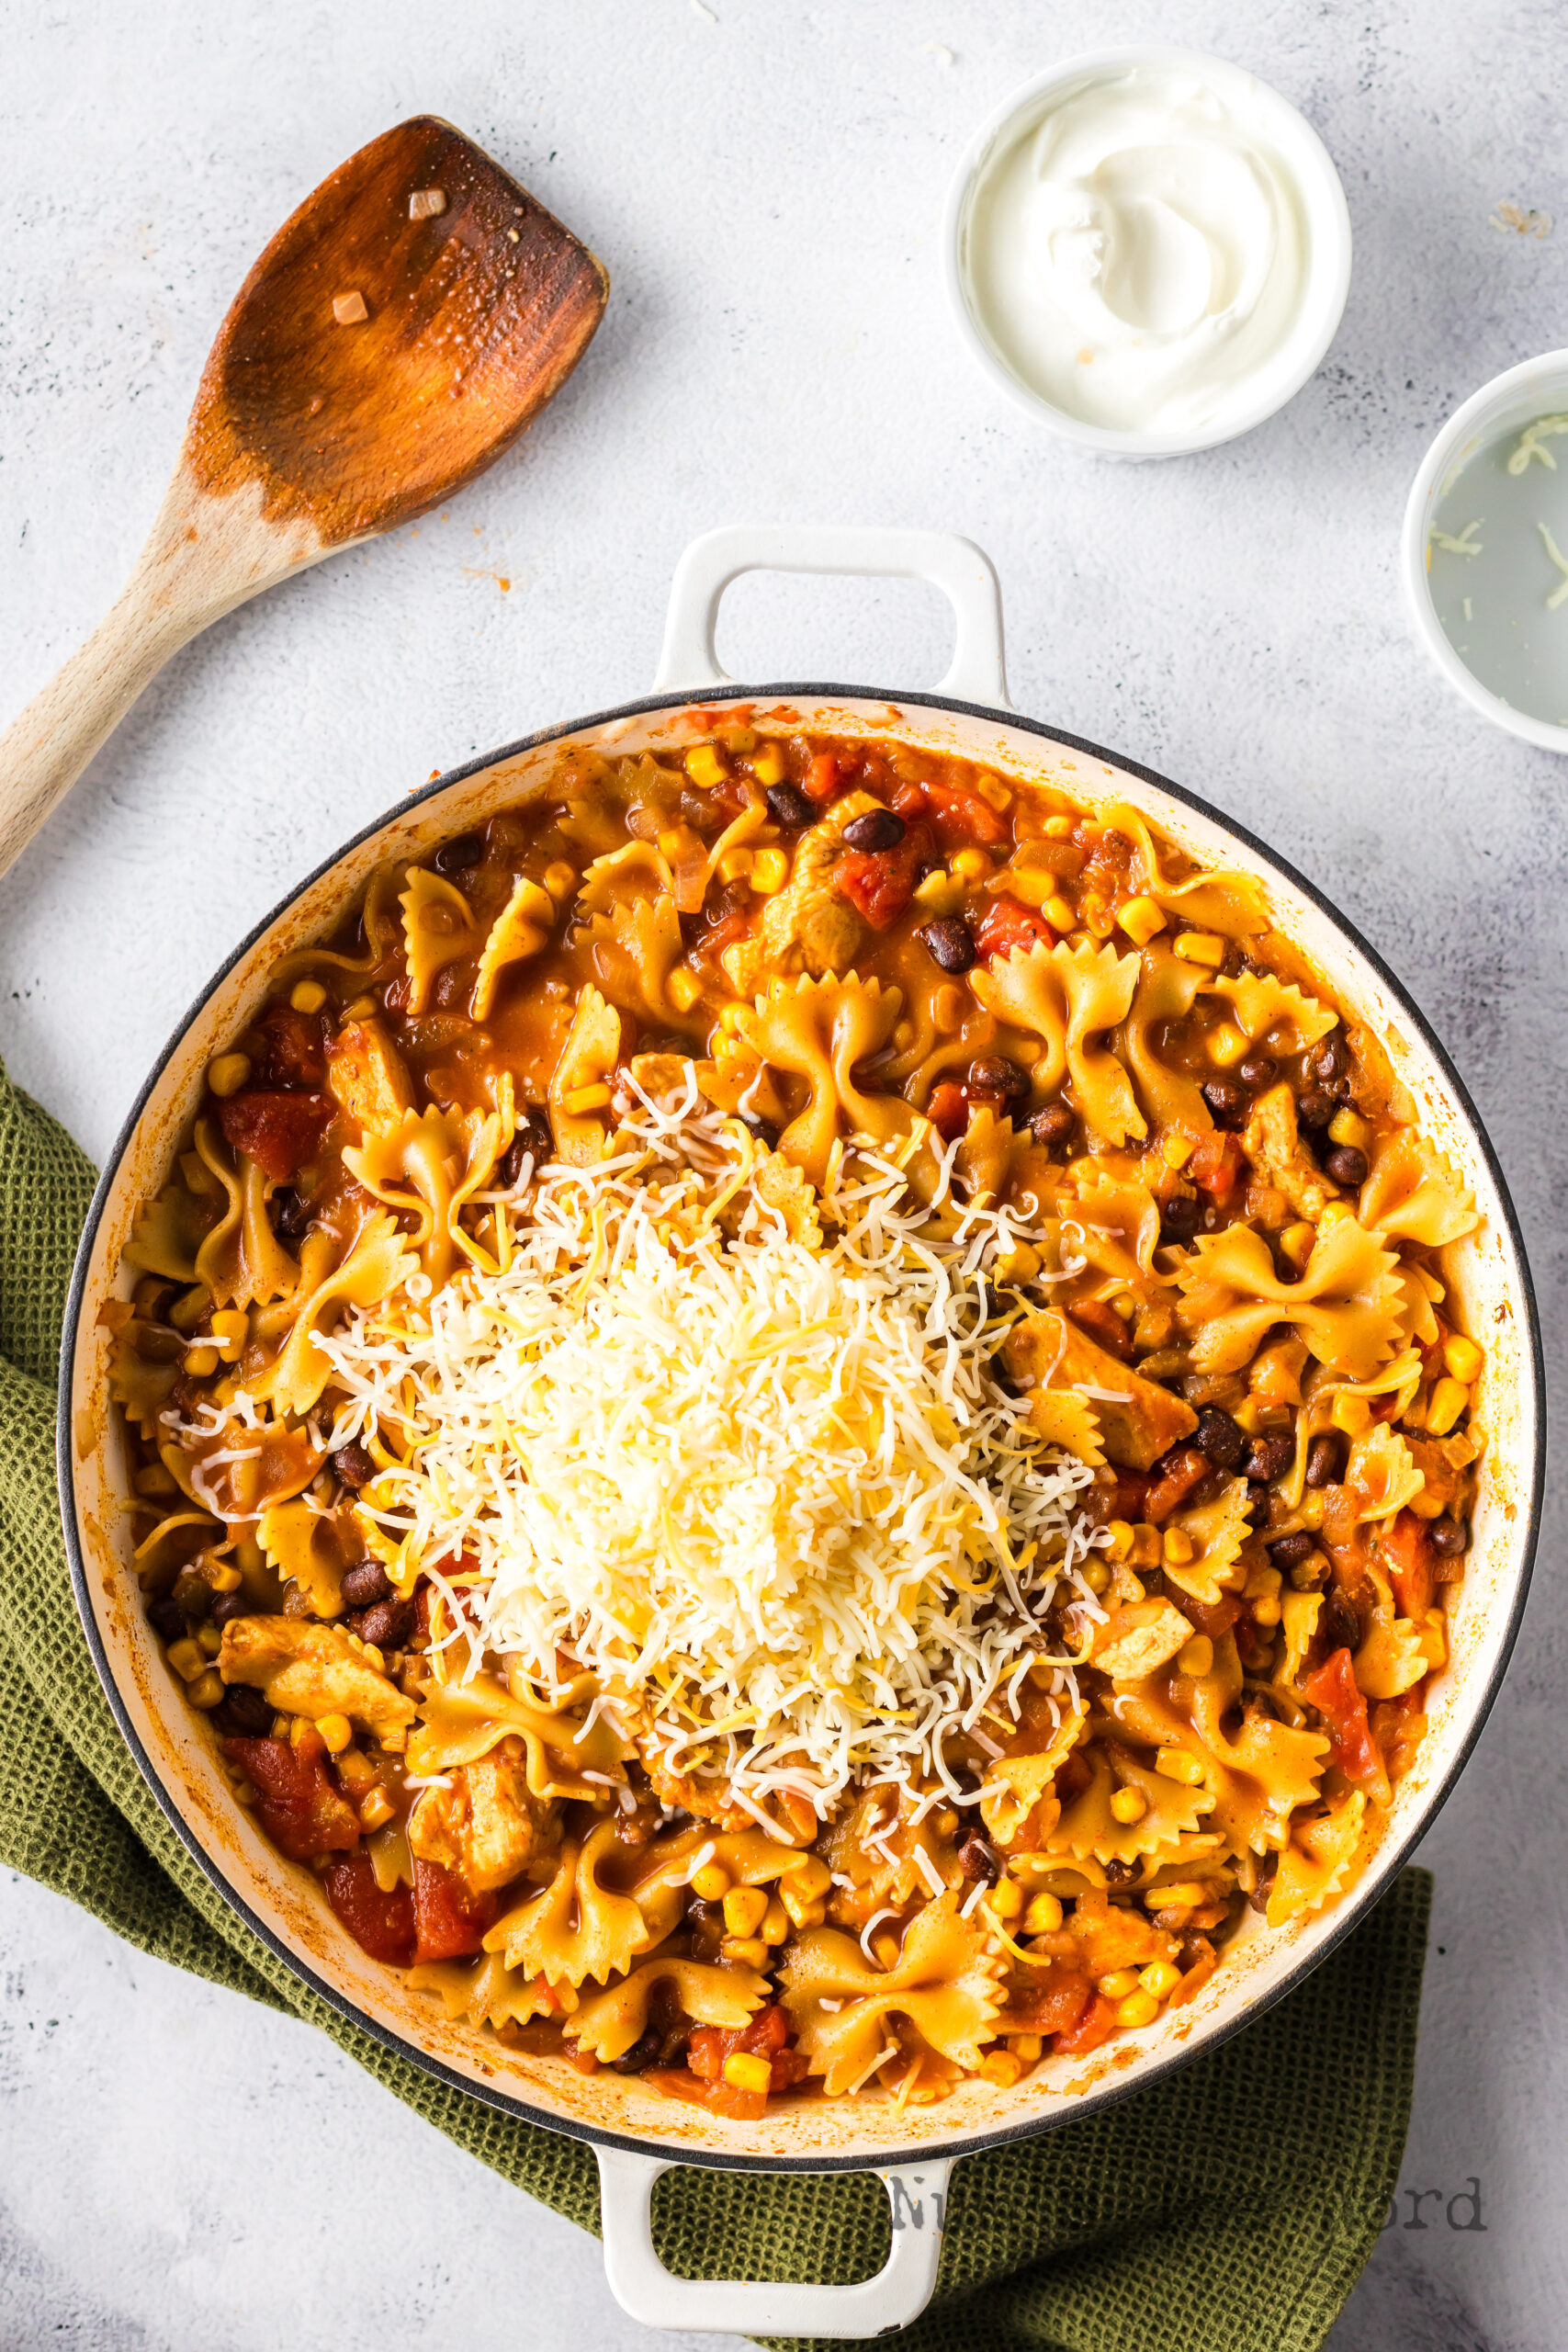 Cheese added to mexican pasta mixture.